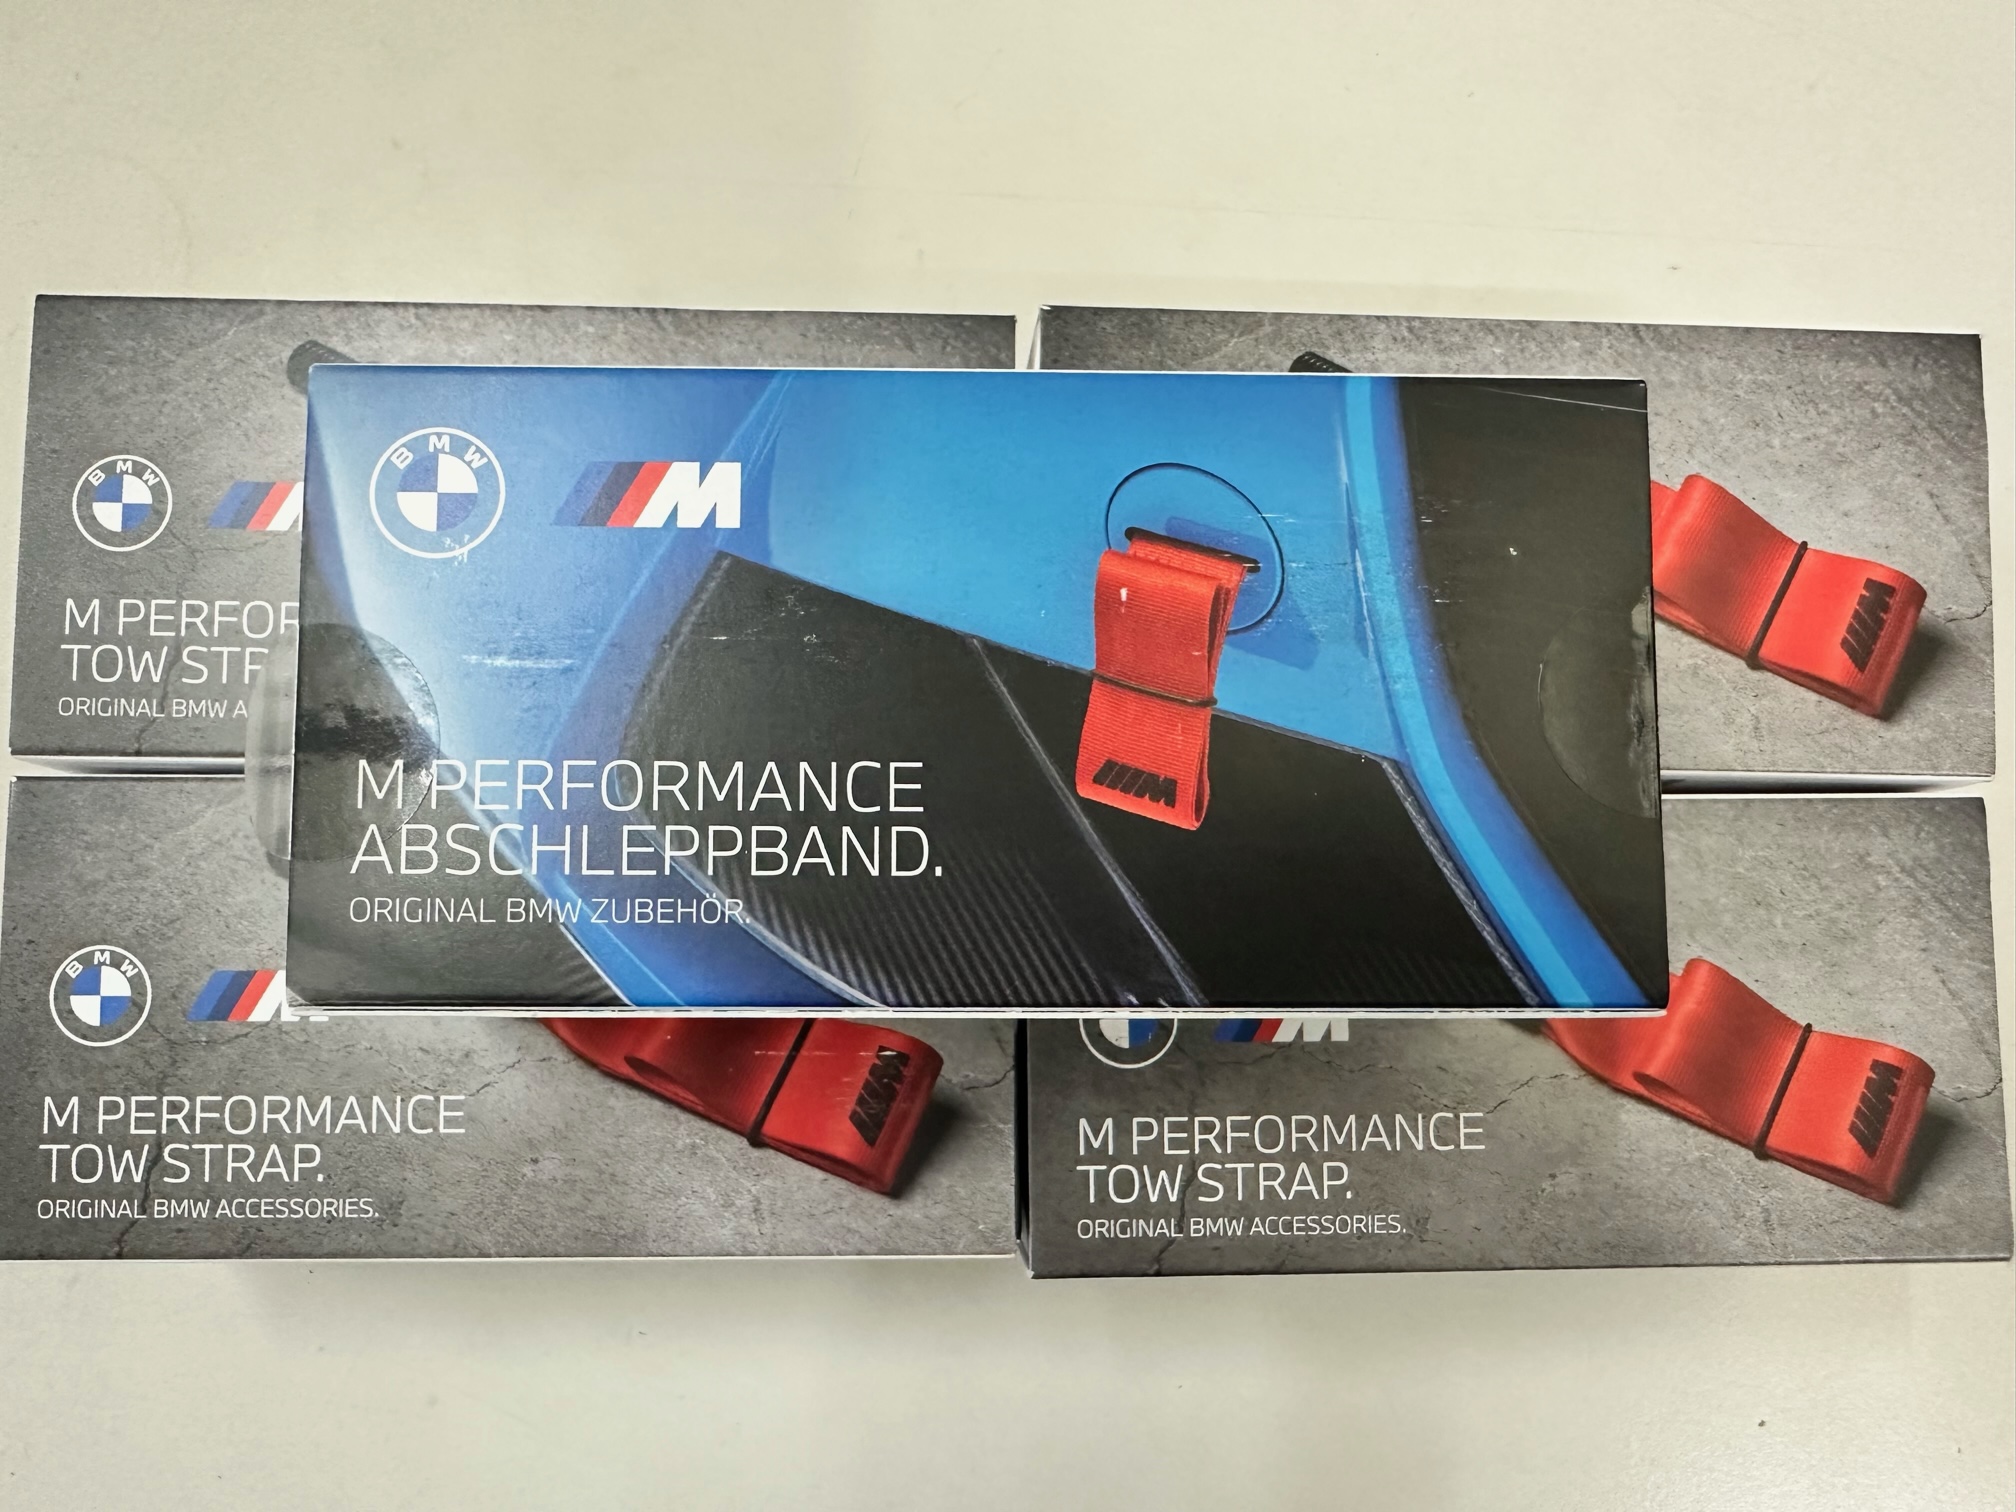 M Performance TOW STRAP